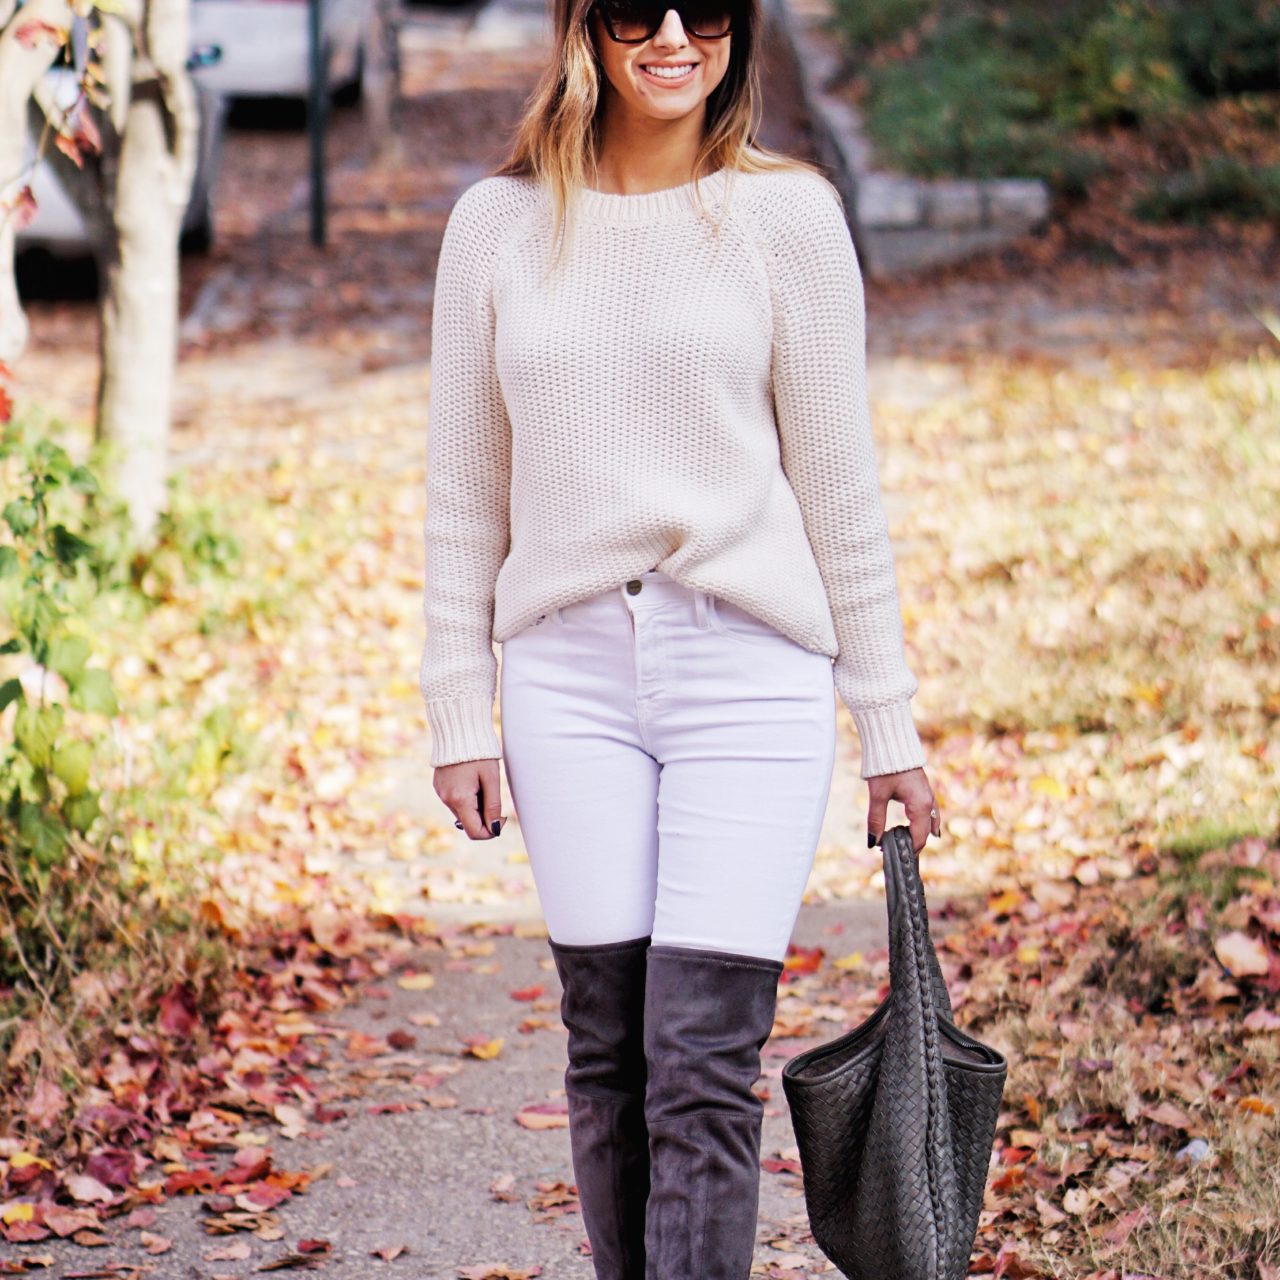 White Jeans With Over The Knee Boots